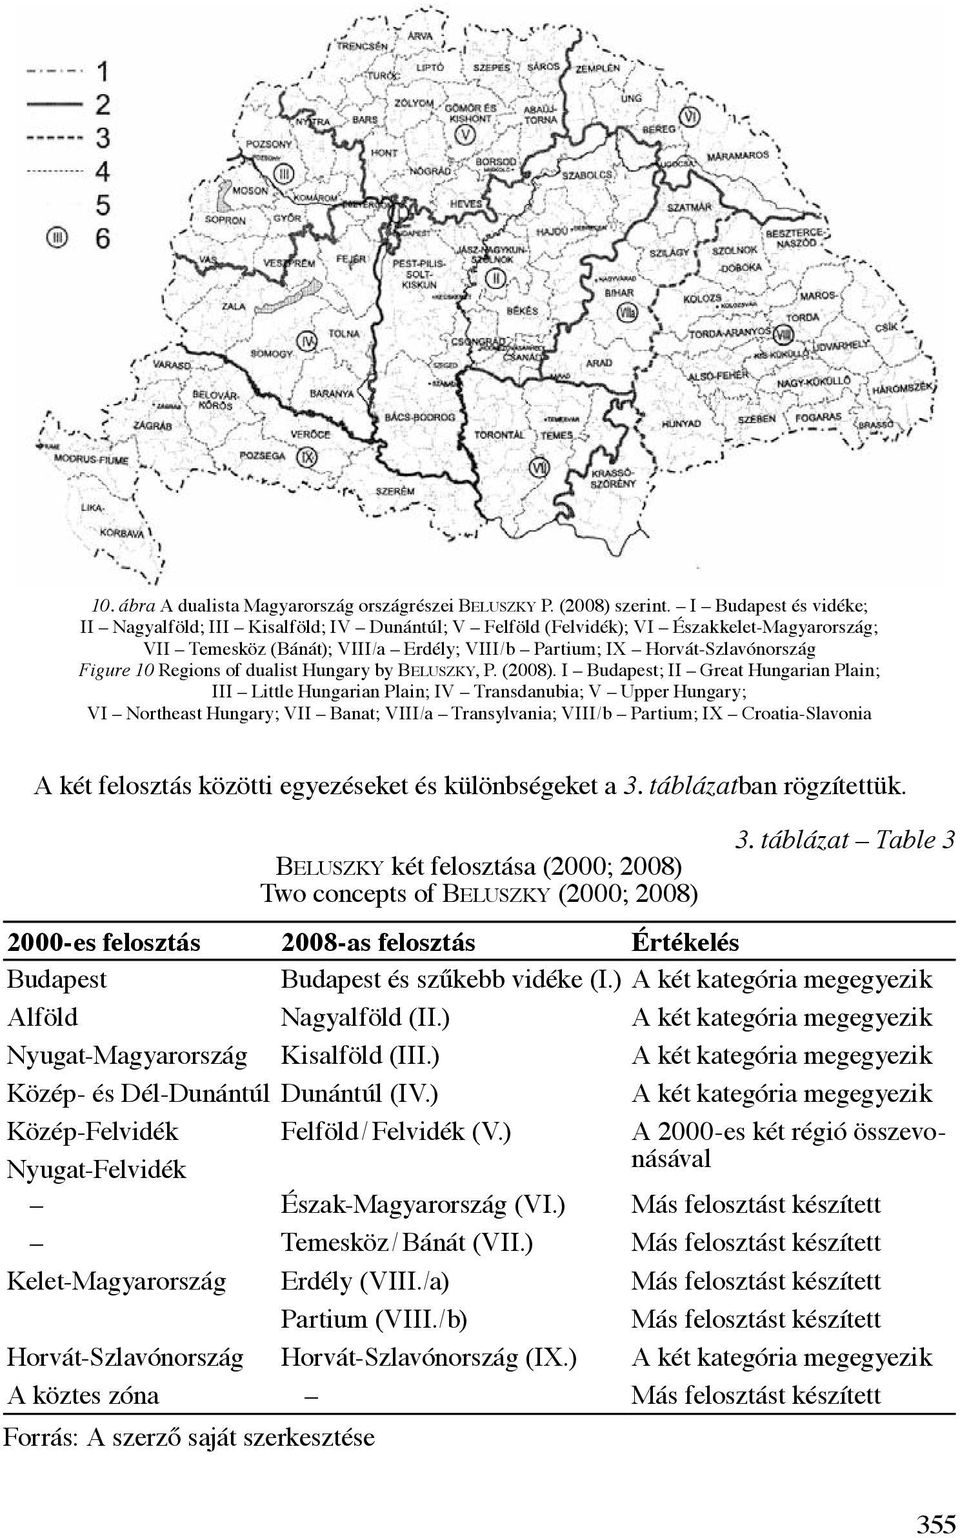 10 Regions of dualist Hungary by Beluszky, P. (2008).